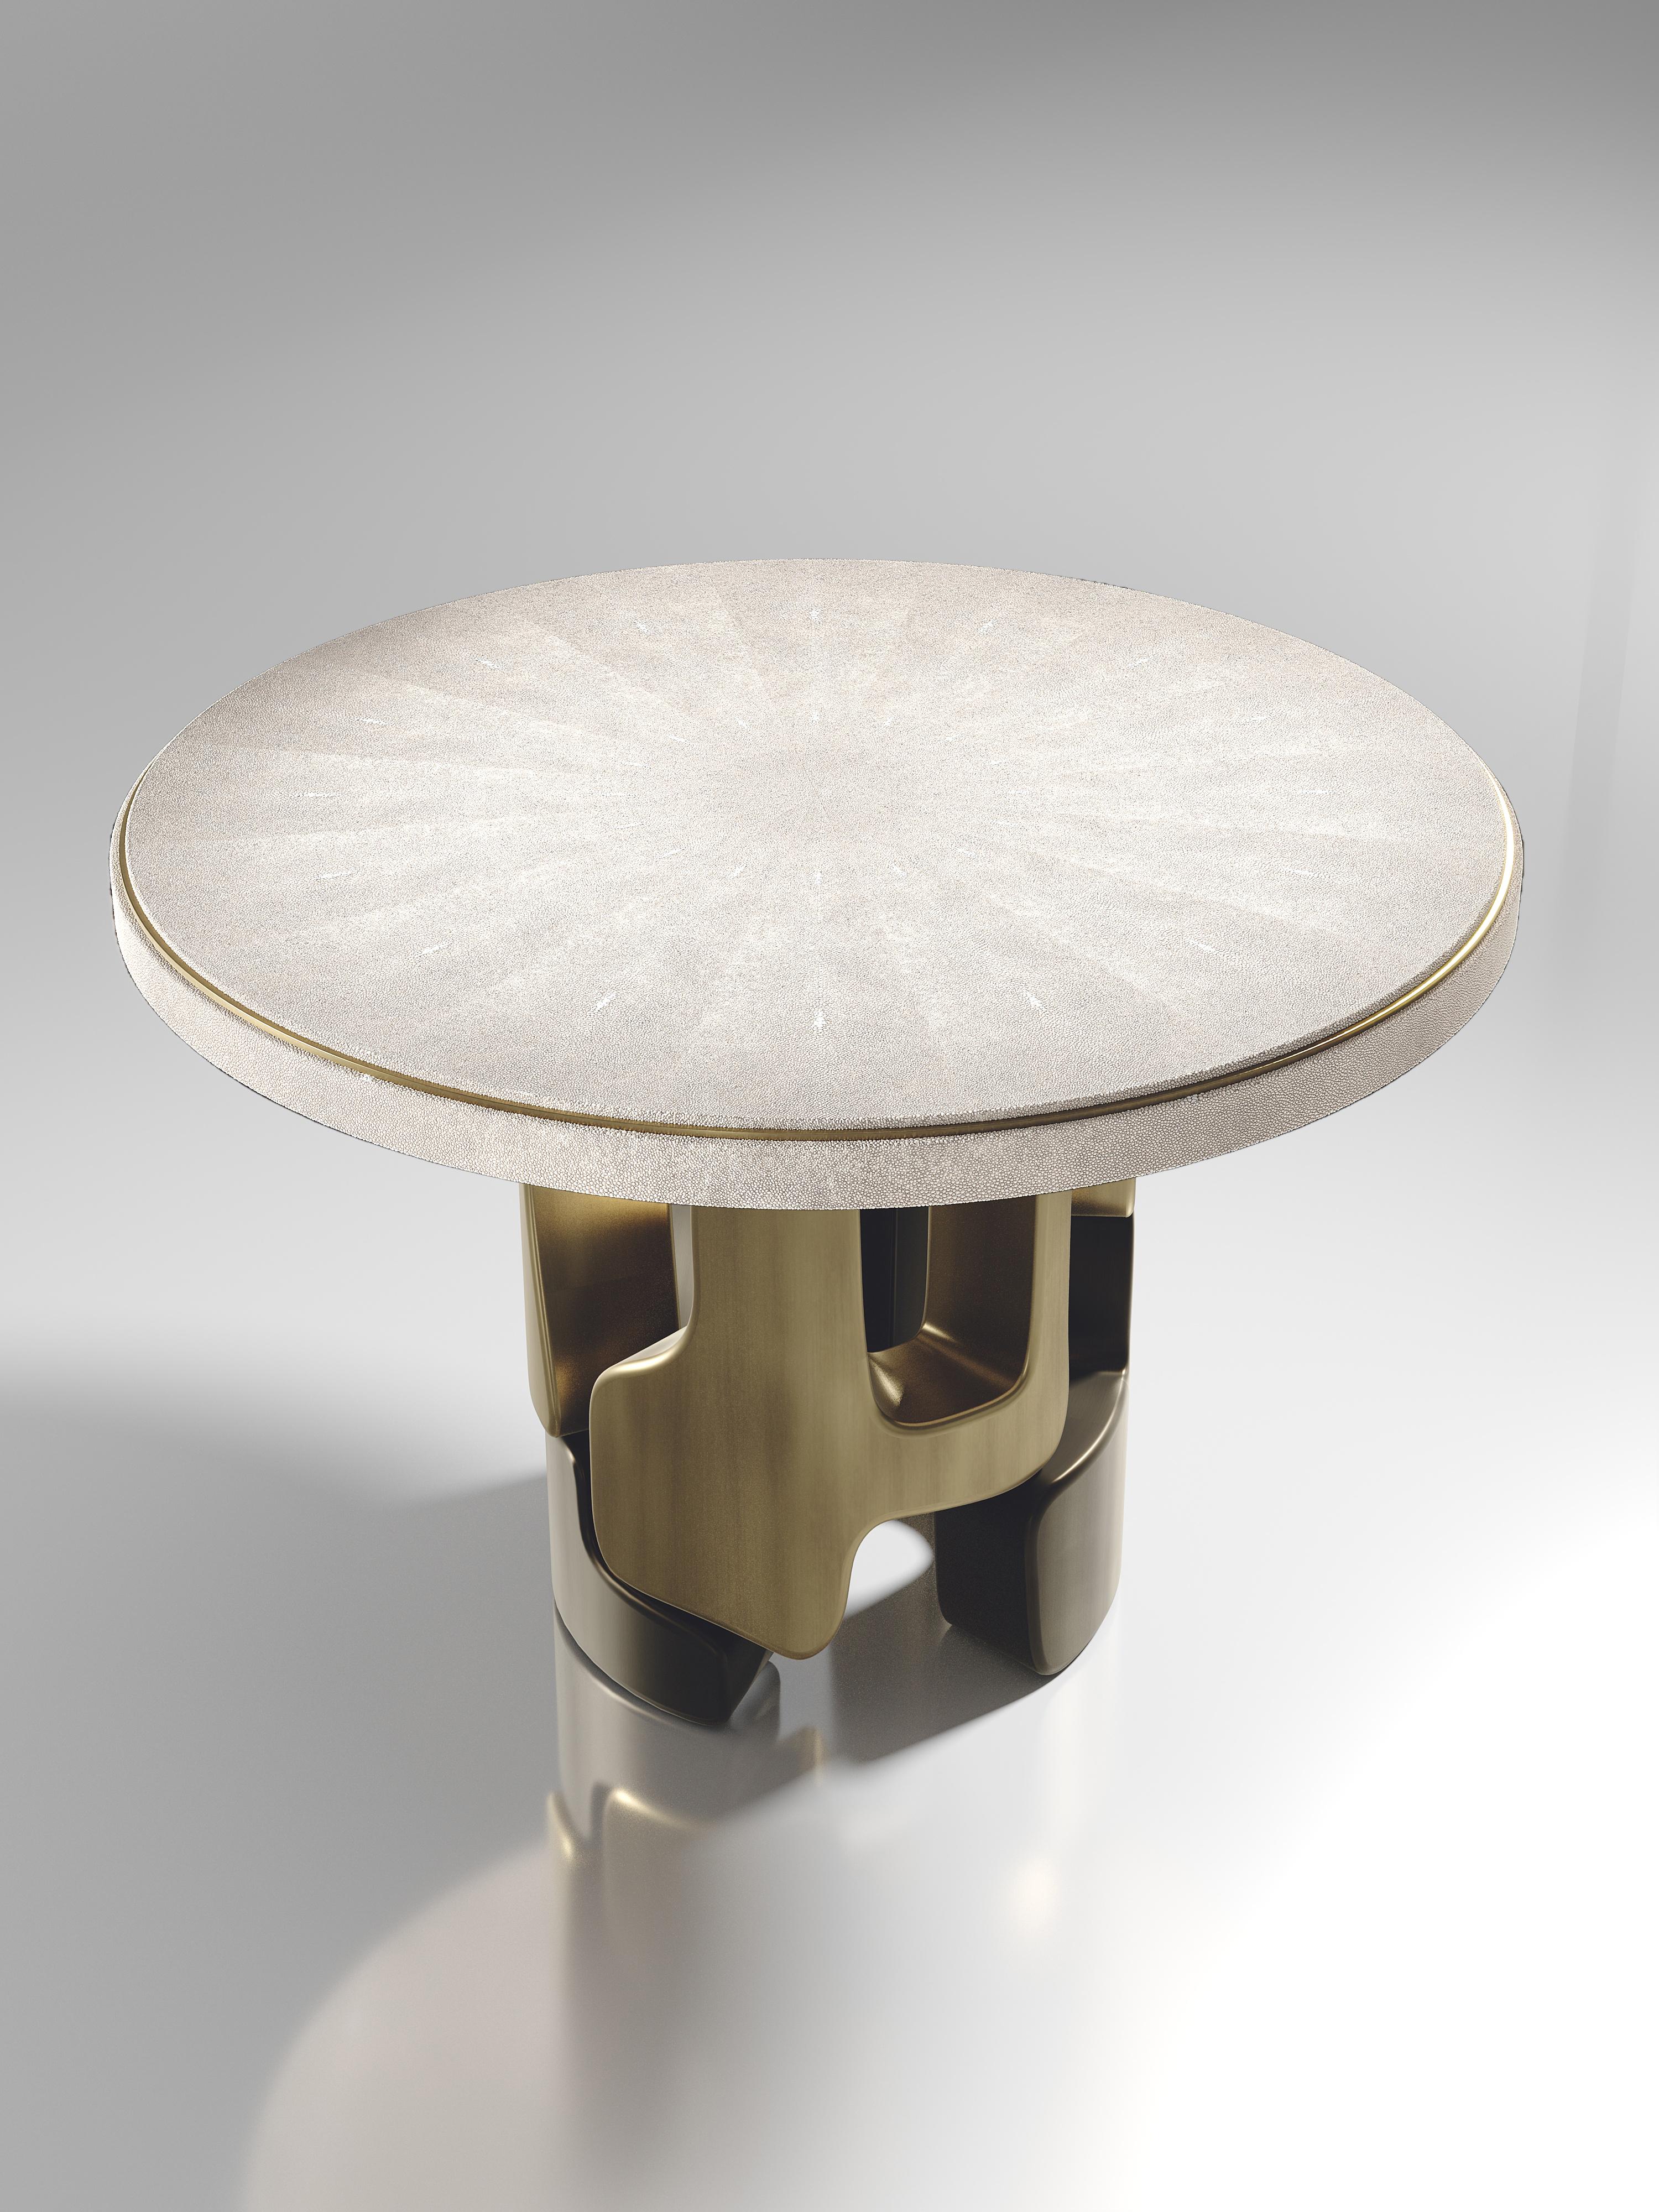 Shell Inlaid Breakfast Table with Bronze Patina Brass Details by Kifu Paris In New Condition For Sale In New York, NY